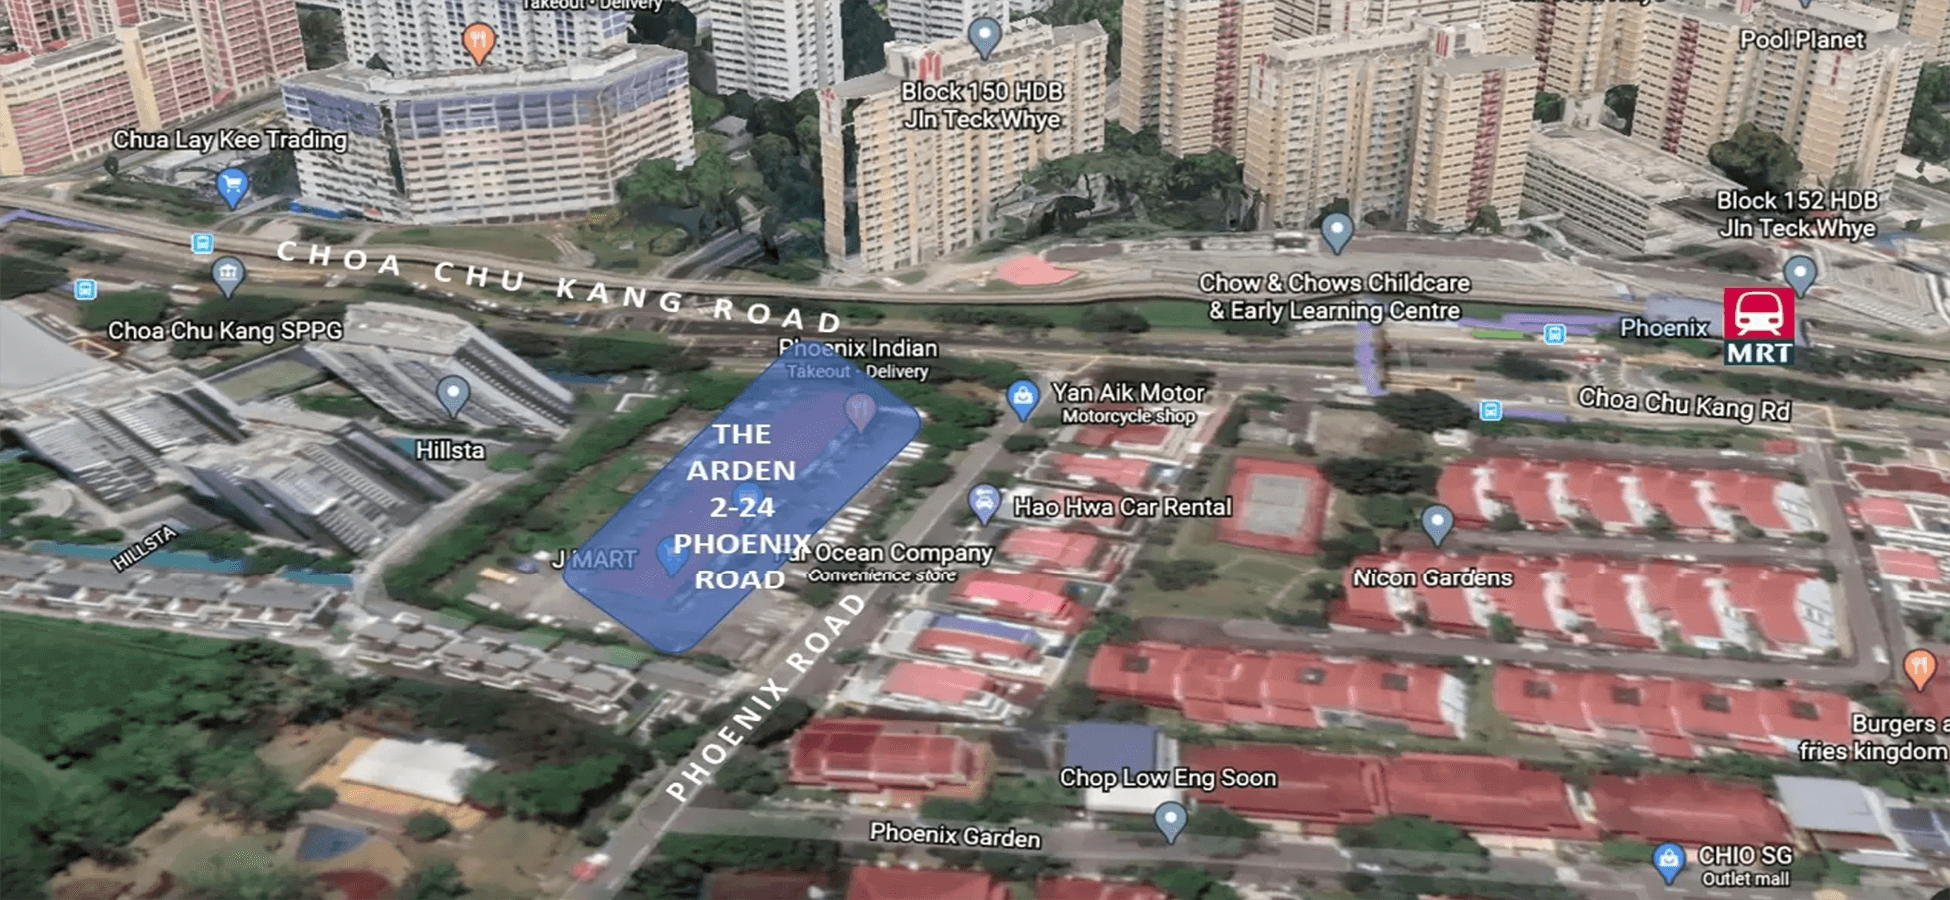 <span>The Arden</span> is in D23<br>Bukit Batok Planning Area